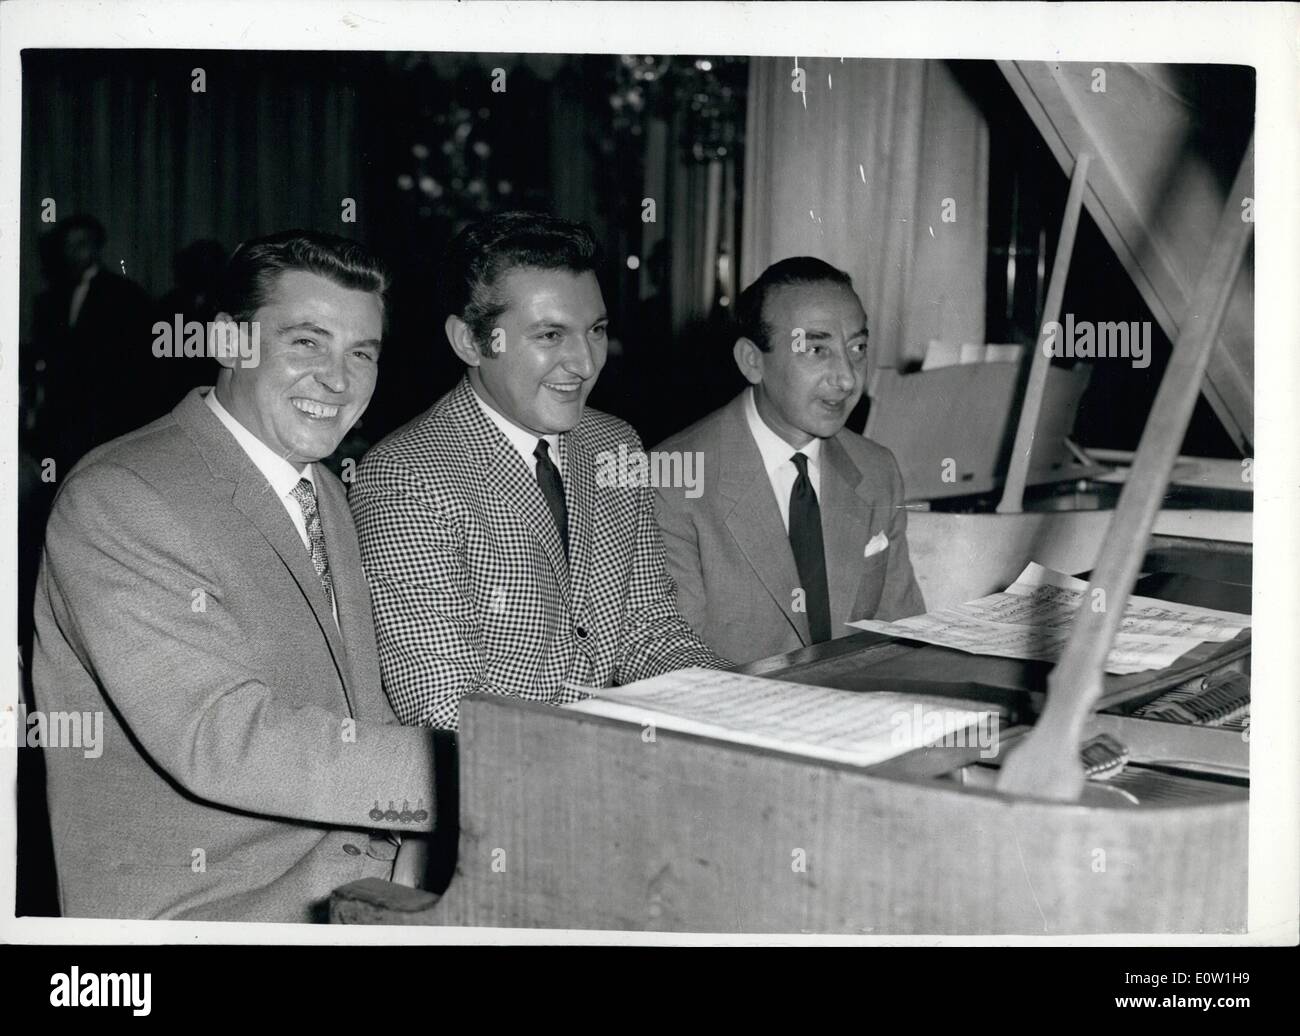 Nov. 11, 1960 - Recording Stars at Variety Club's 'Golden Disc' Luncheon. Many Top British and American recording stars attended today's Variety Club's annual 'Golden Dic' luncheon at the Dorchester Hotel. Keystone Photo Shows: Pictured on one piano at the luncheon today are (L to R): pianist composer, Russ Conway, American pianist Liberace and conductor composer, Stanley Black. Stock Photo